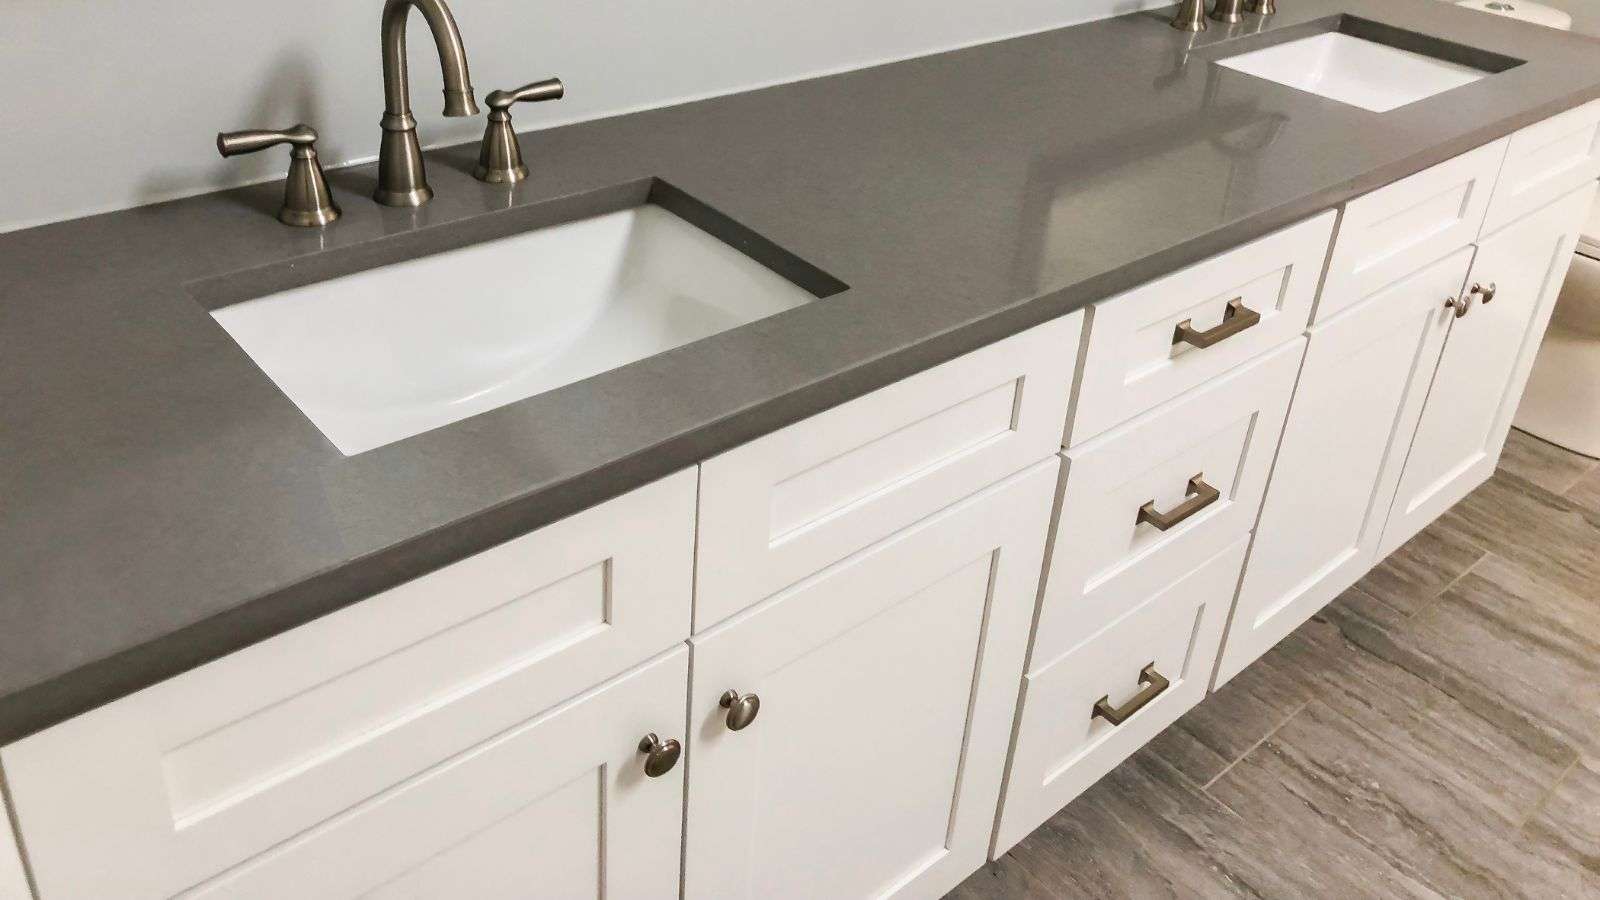 roach infestation in bathroom cabinets - bighomeprojects.com